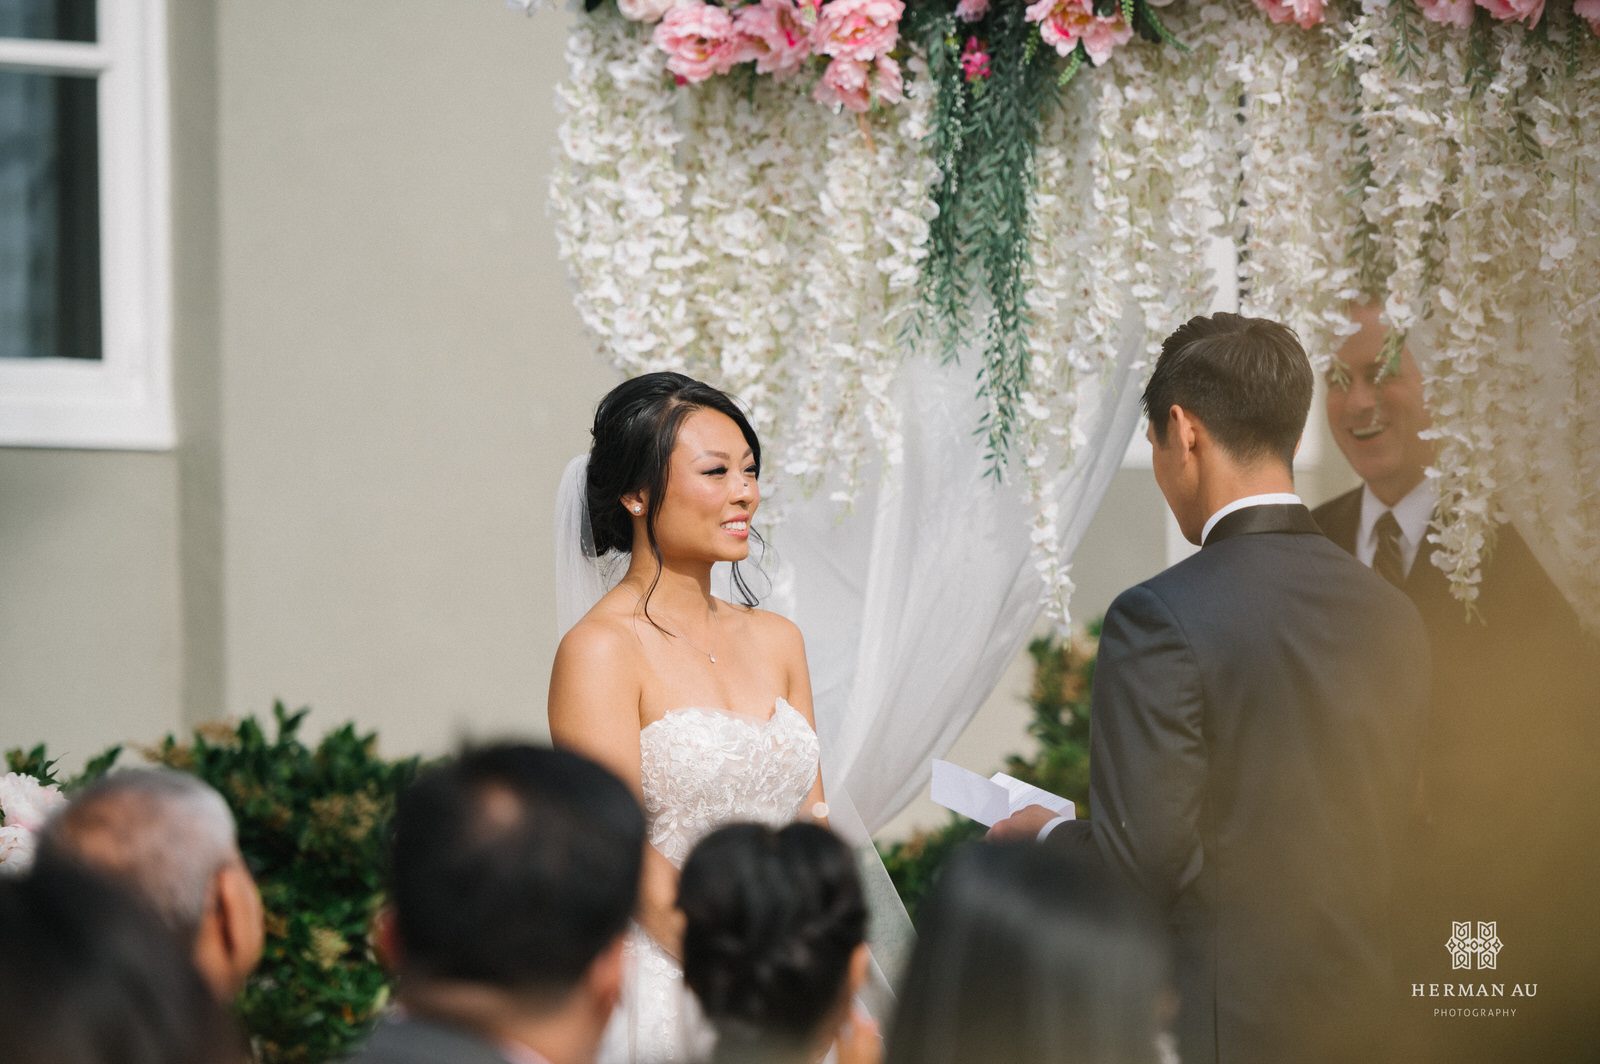 Bride staring into her groom's eyes during the ceremony